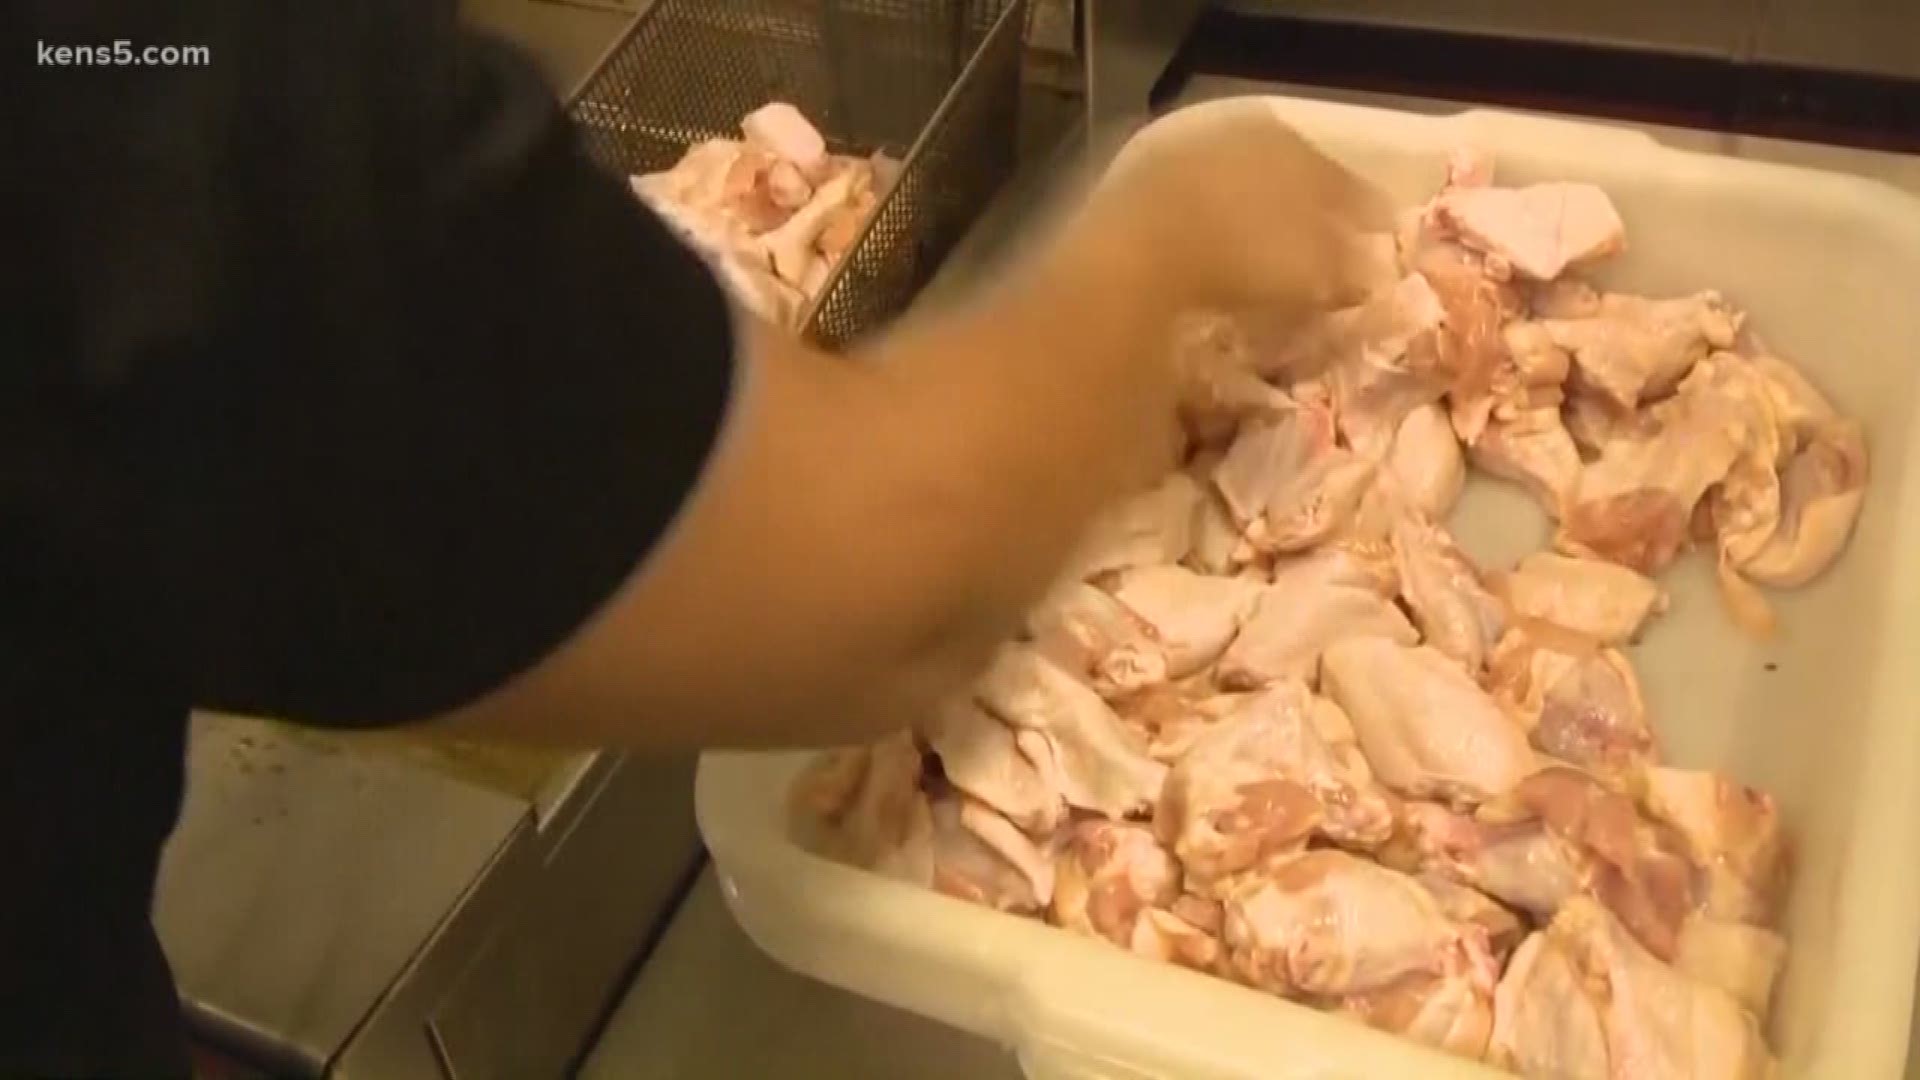 The U.S. Department of Agriculture announced a study Tuesday. It shows people are putting themselves at risk of illness when they wash or rinse raw poultry.